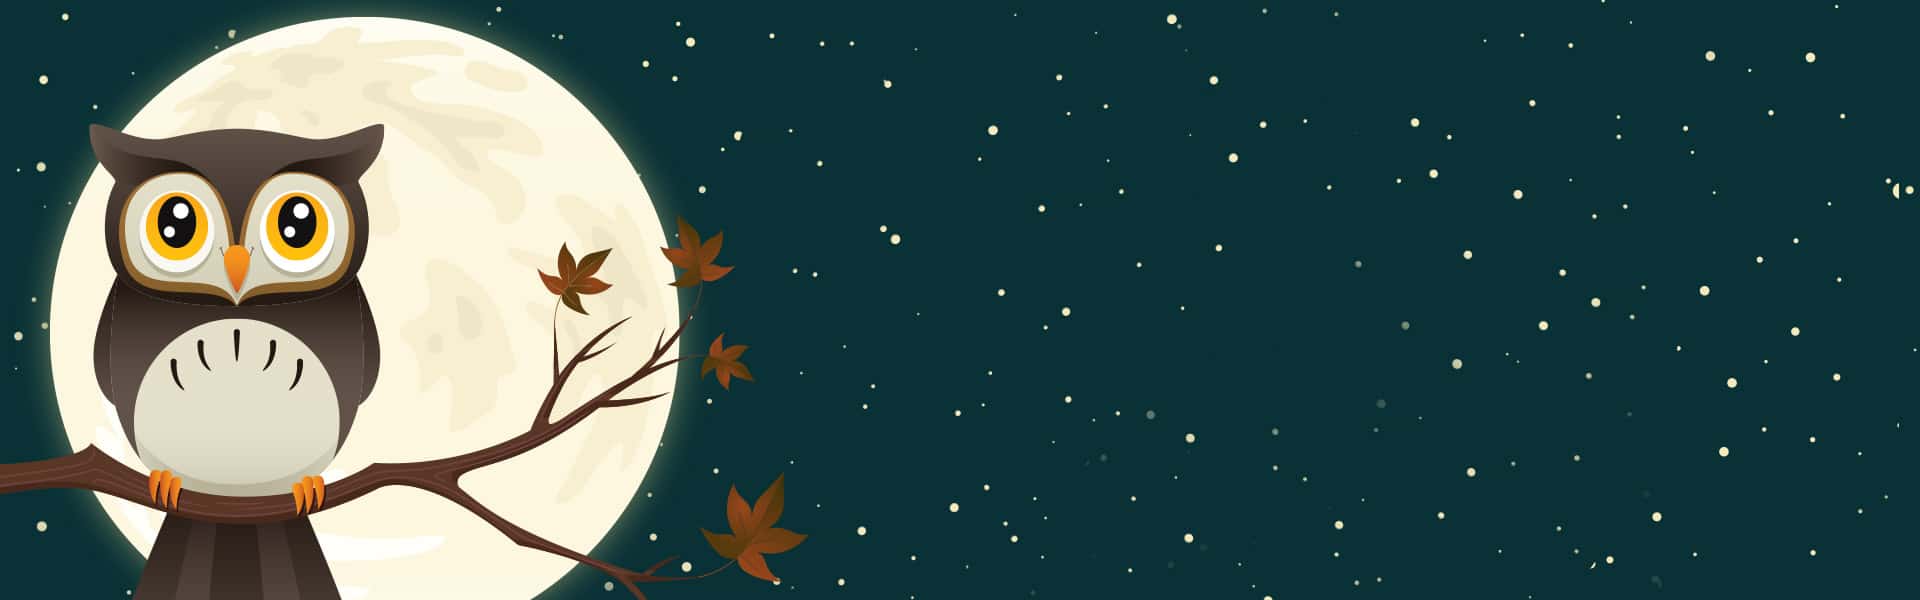 Graphic drawing of an owl perched on limb with moon in background